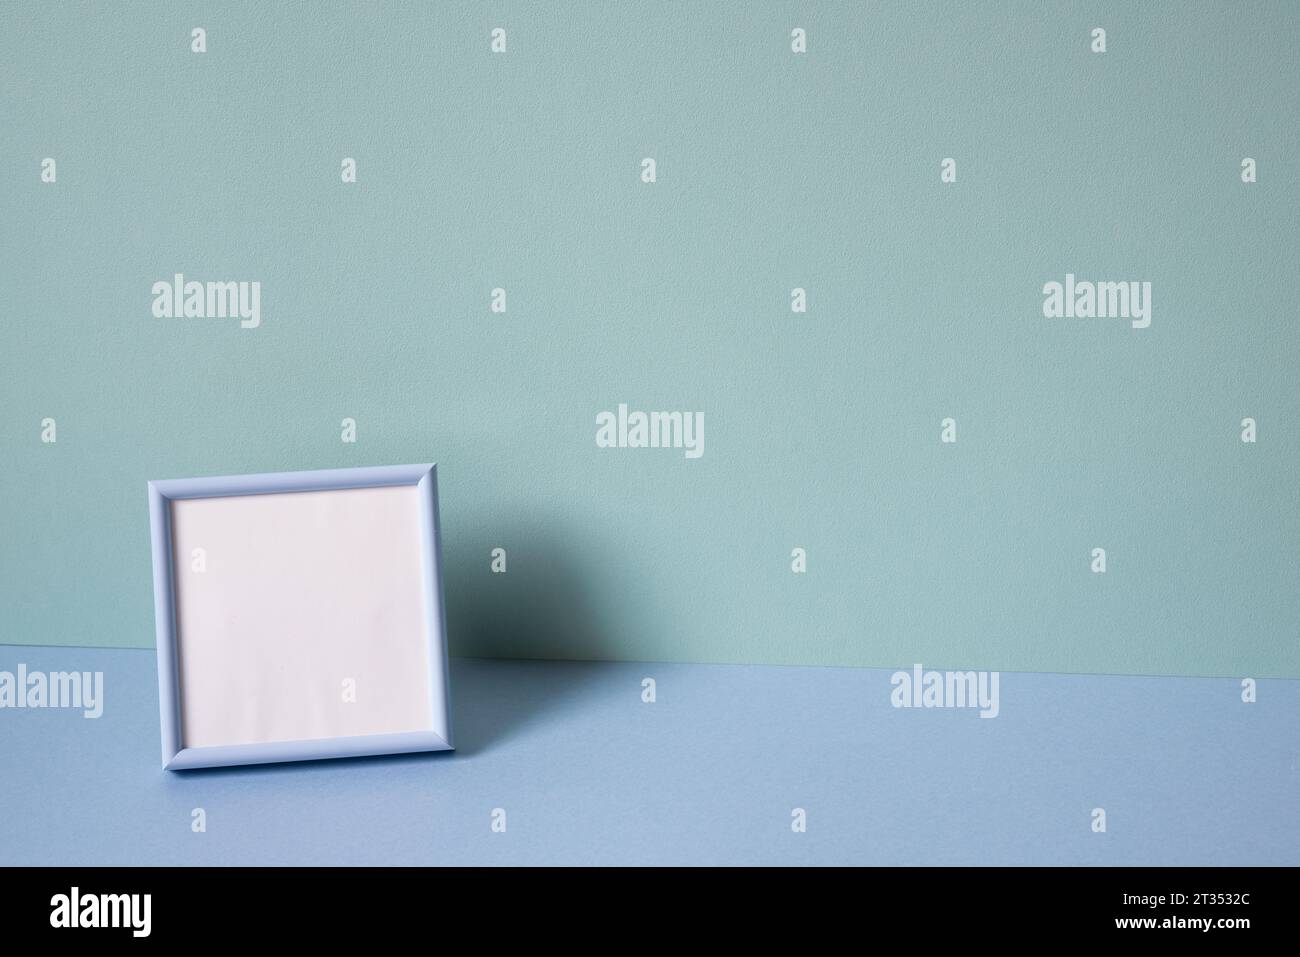 Blank picture frame on mint blue background. copy space Stock Photo